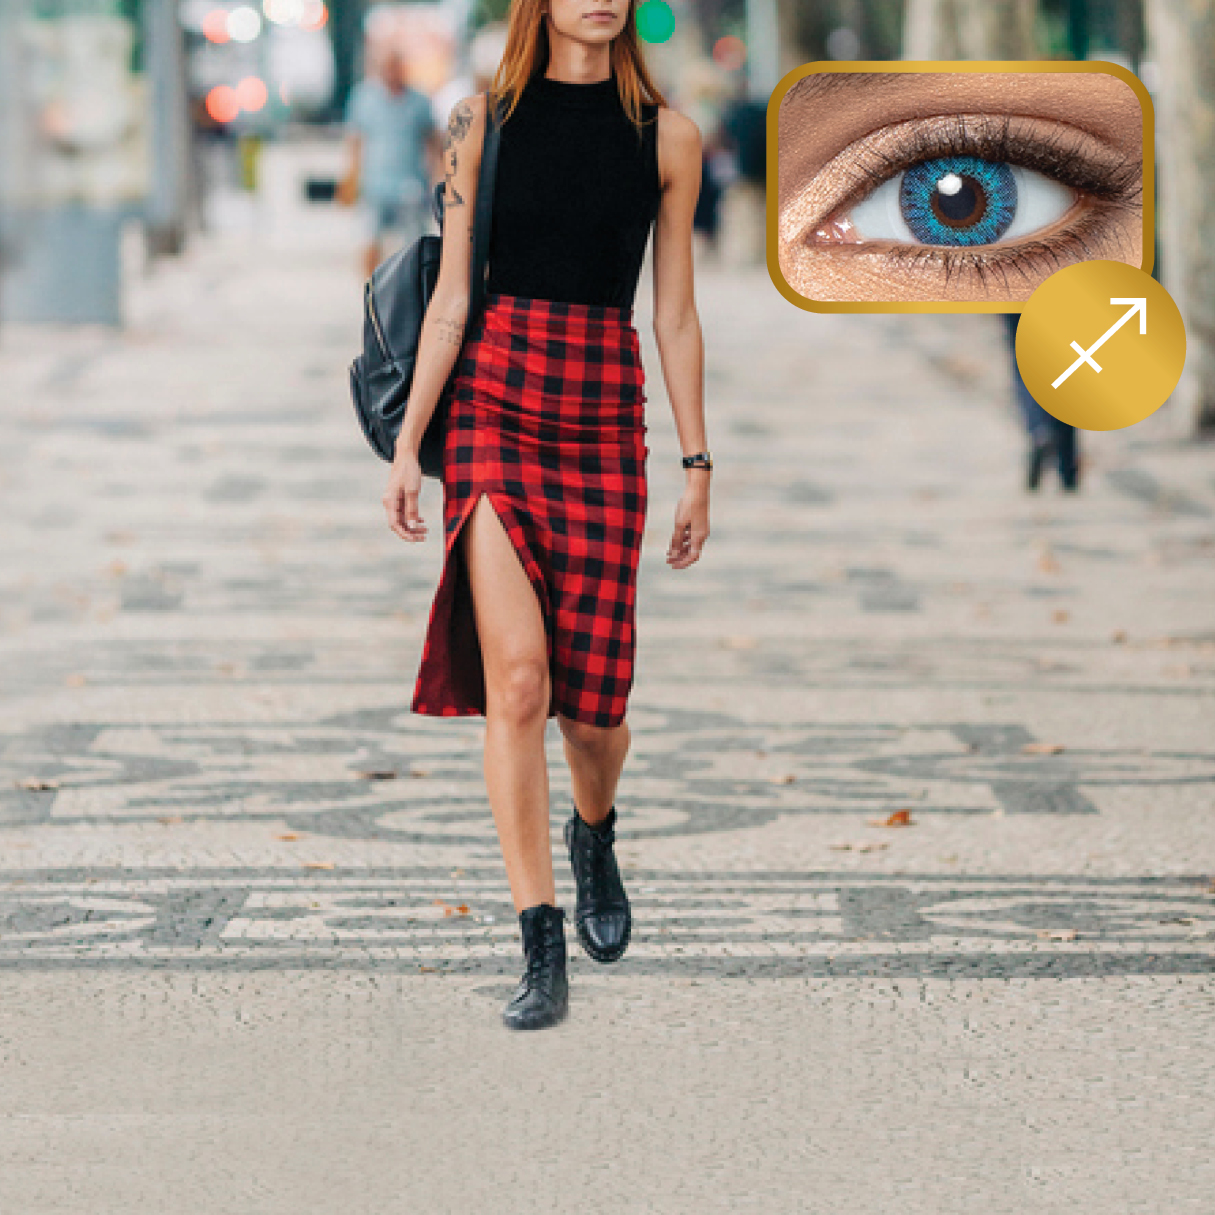 Woman walking in street with checkerboard skirt